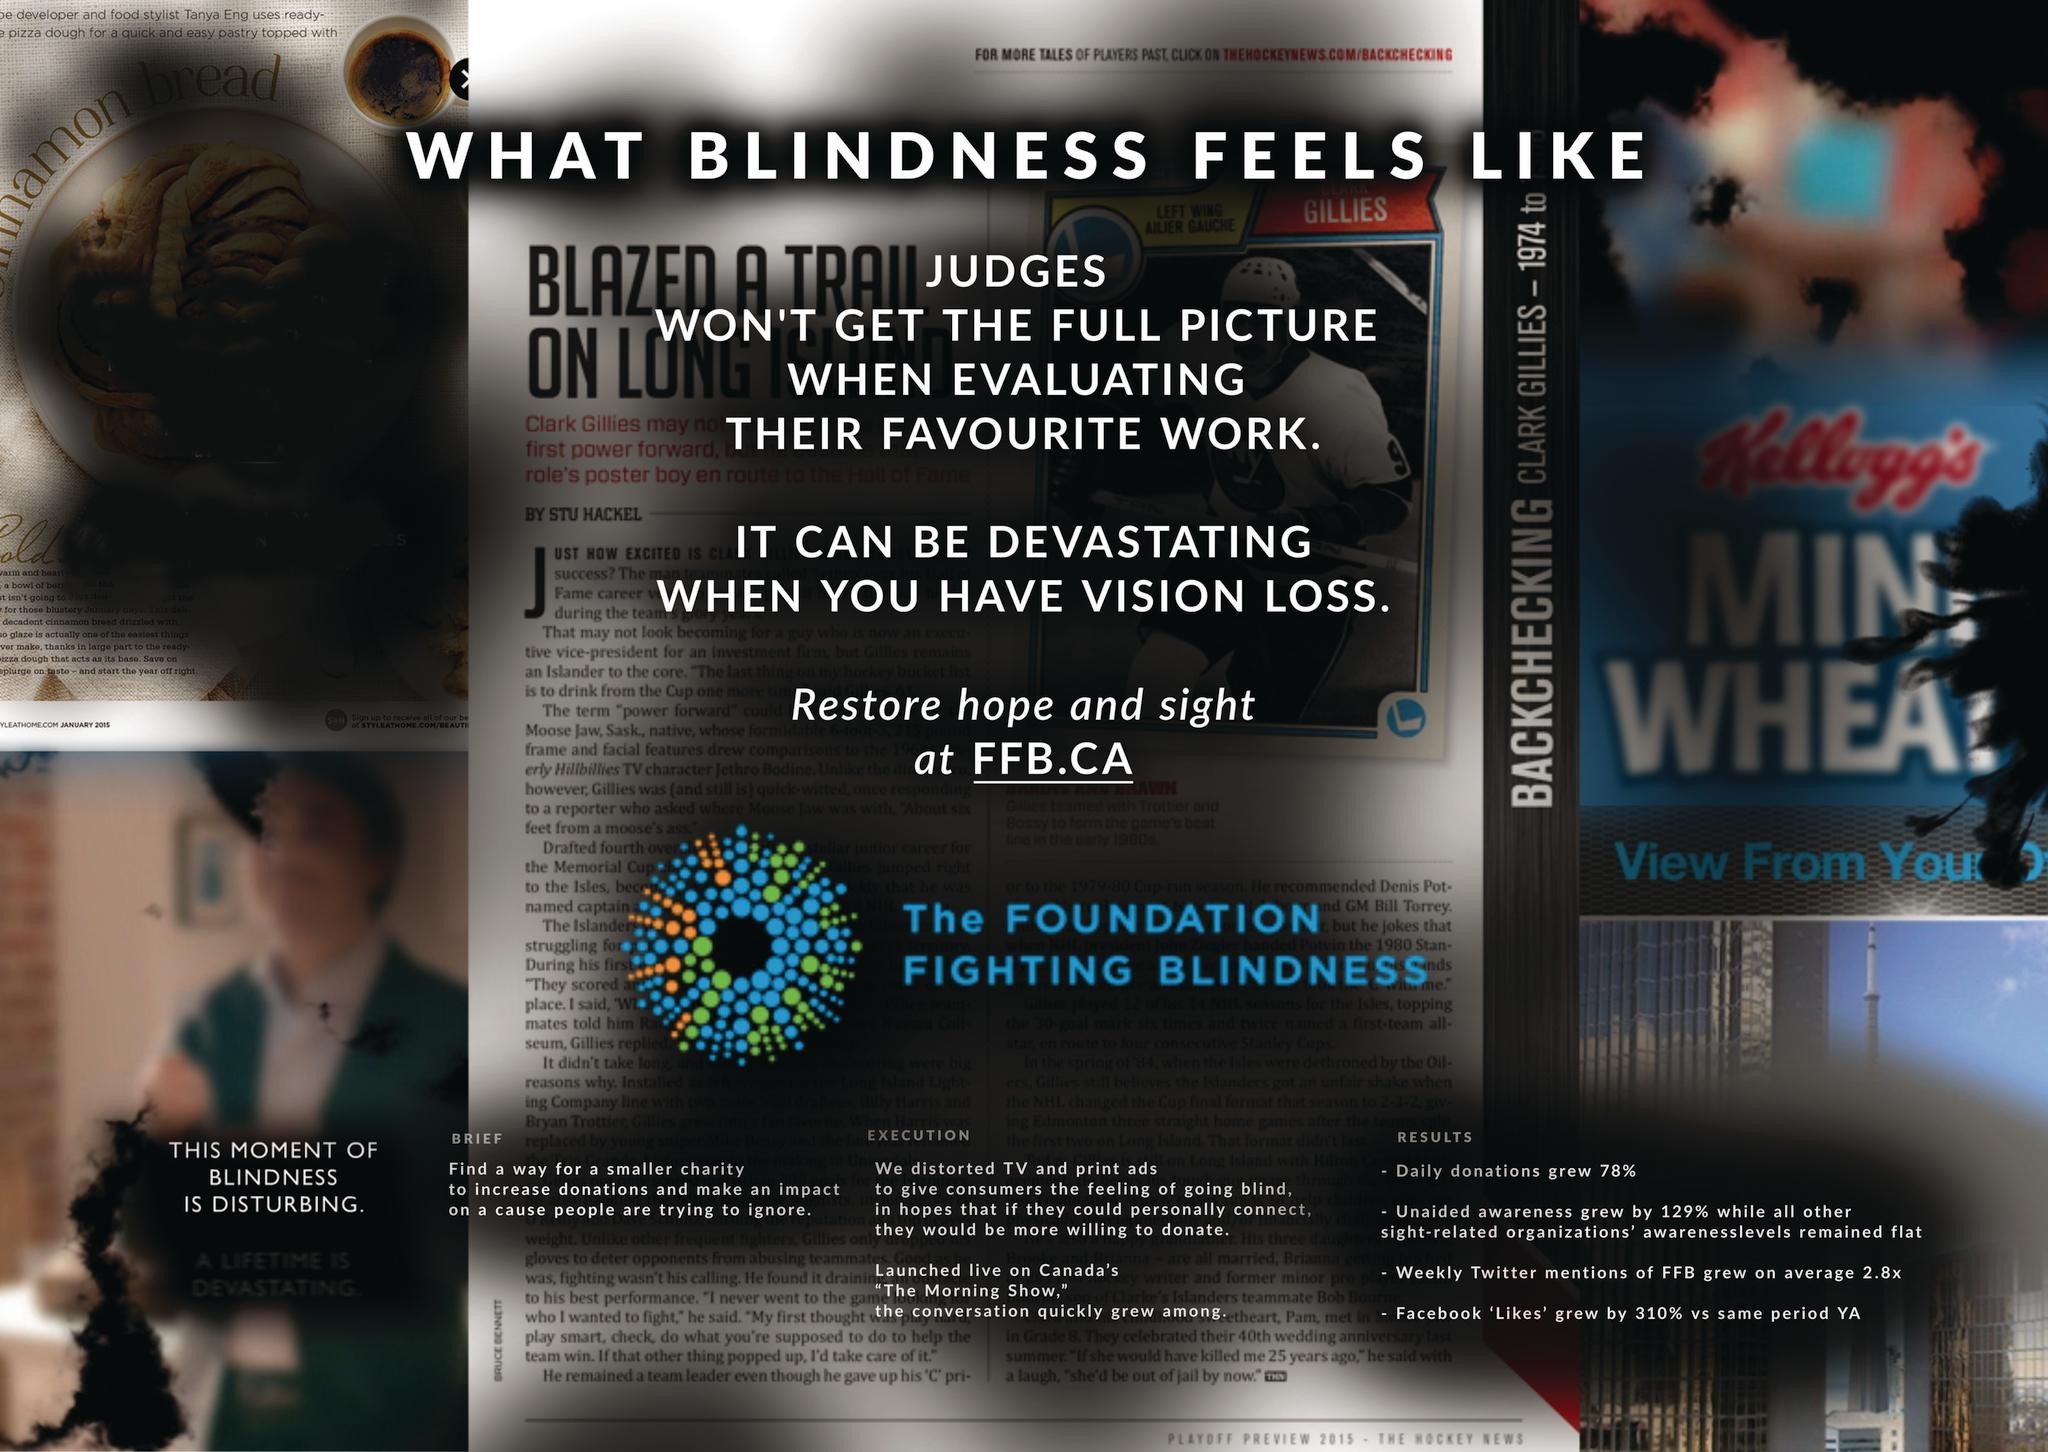 SMG Canada & Foundation Fighting Blindness "Experience Blindness" Campaign